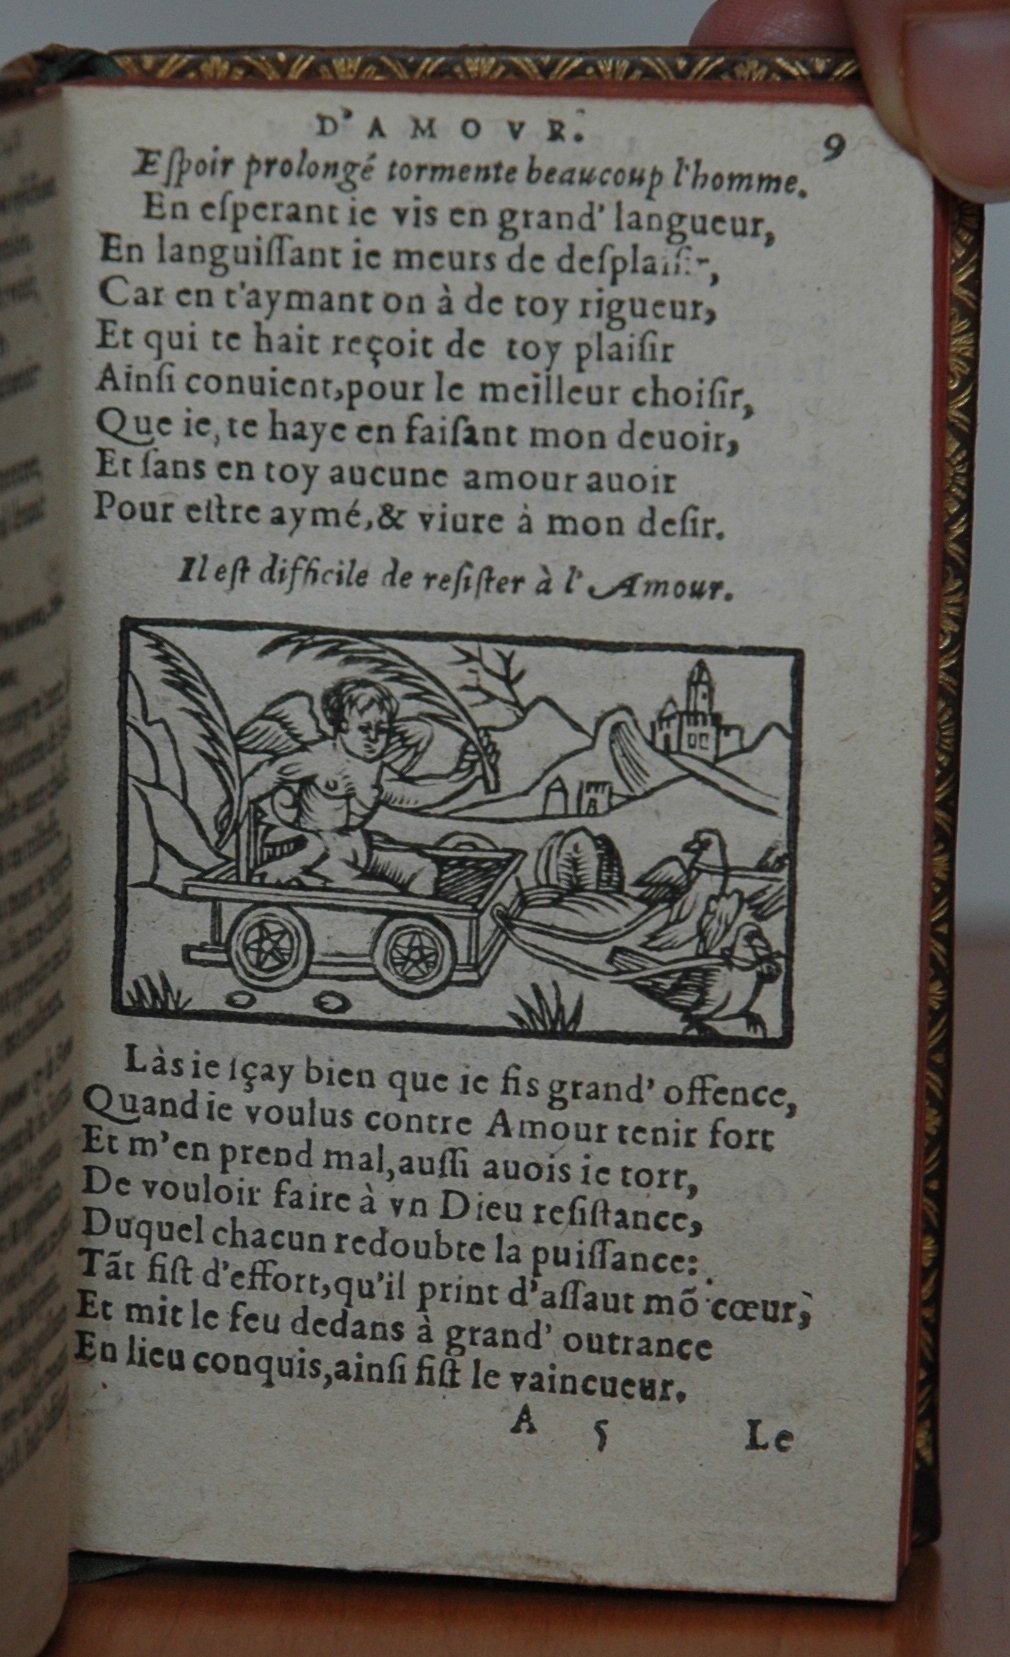 http://eman-archives.org/import/TJI/1582/[1582_Courtizanamoureux_Rigaud]_Page_009.jpg